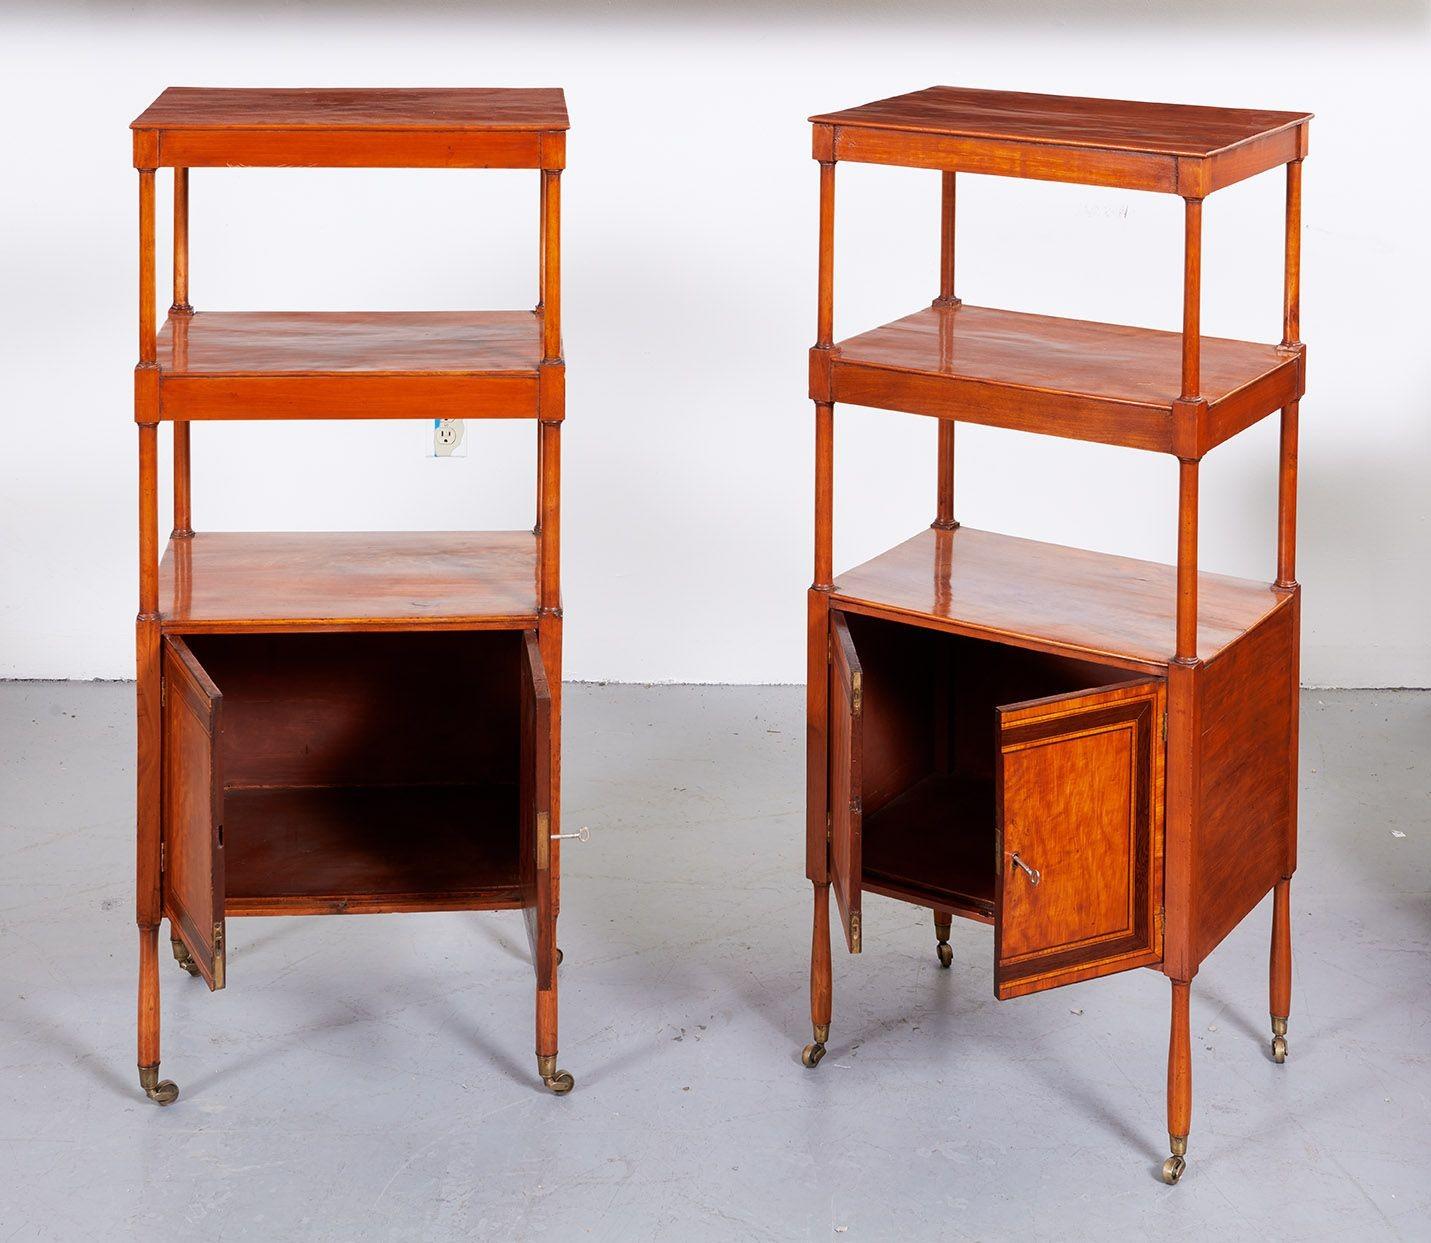 A Rare Pair of 18th c. English Satinwood Etageres In Good Condition For Sale In Greenwich, CT